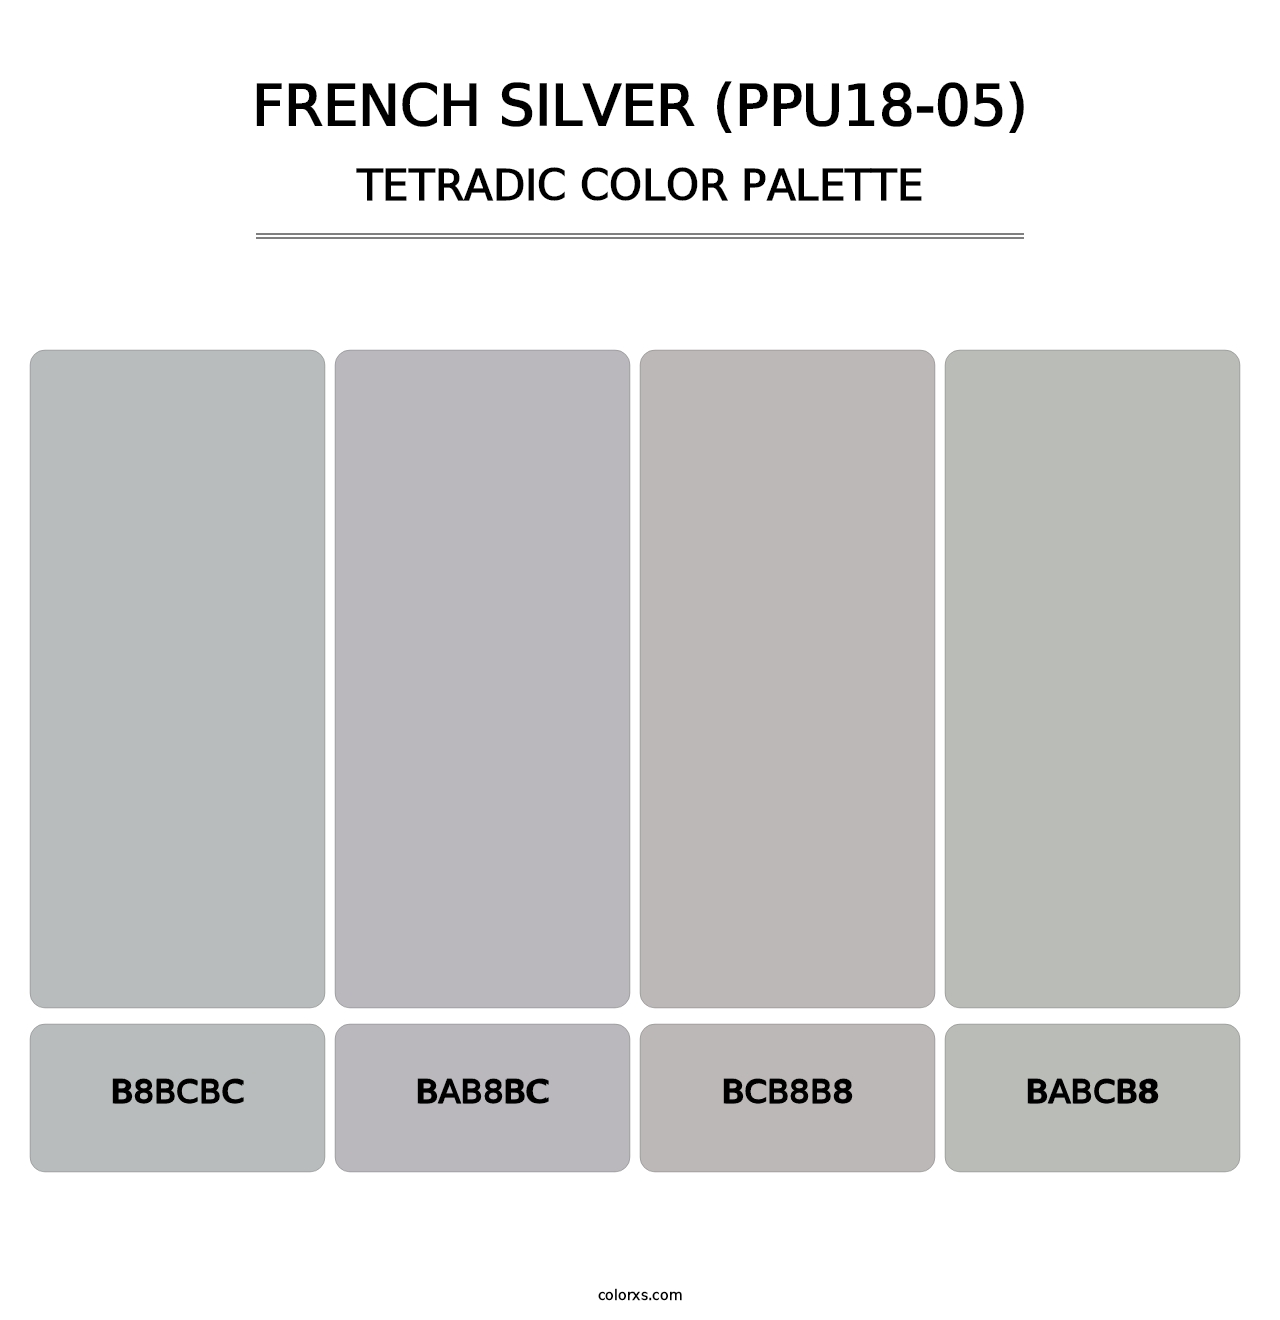 French Silver (PPU18-05) - Tetradic Color Palette